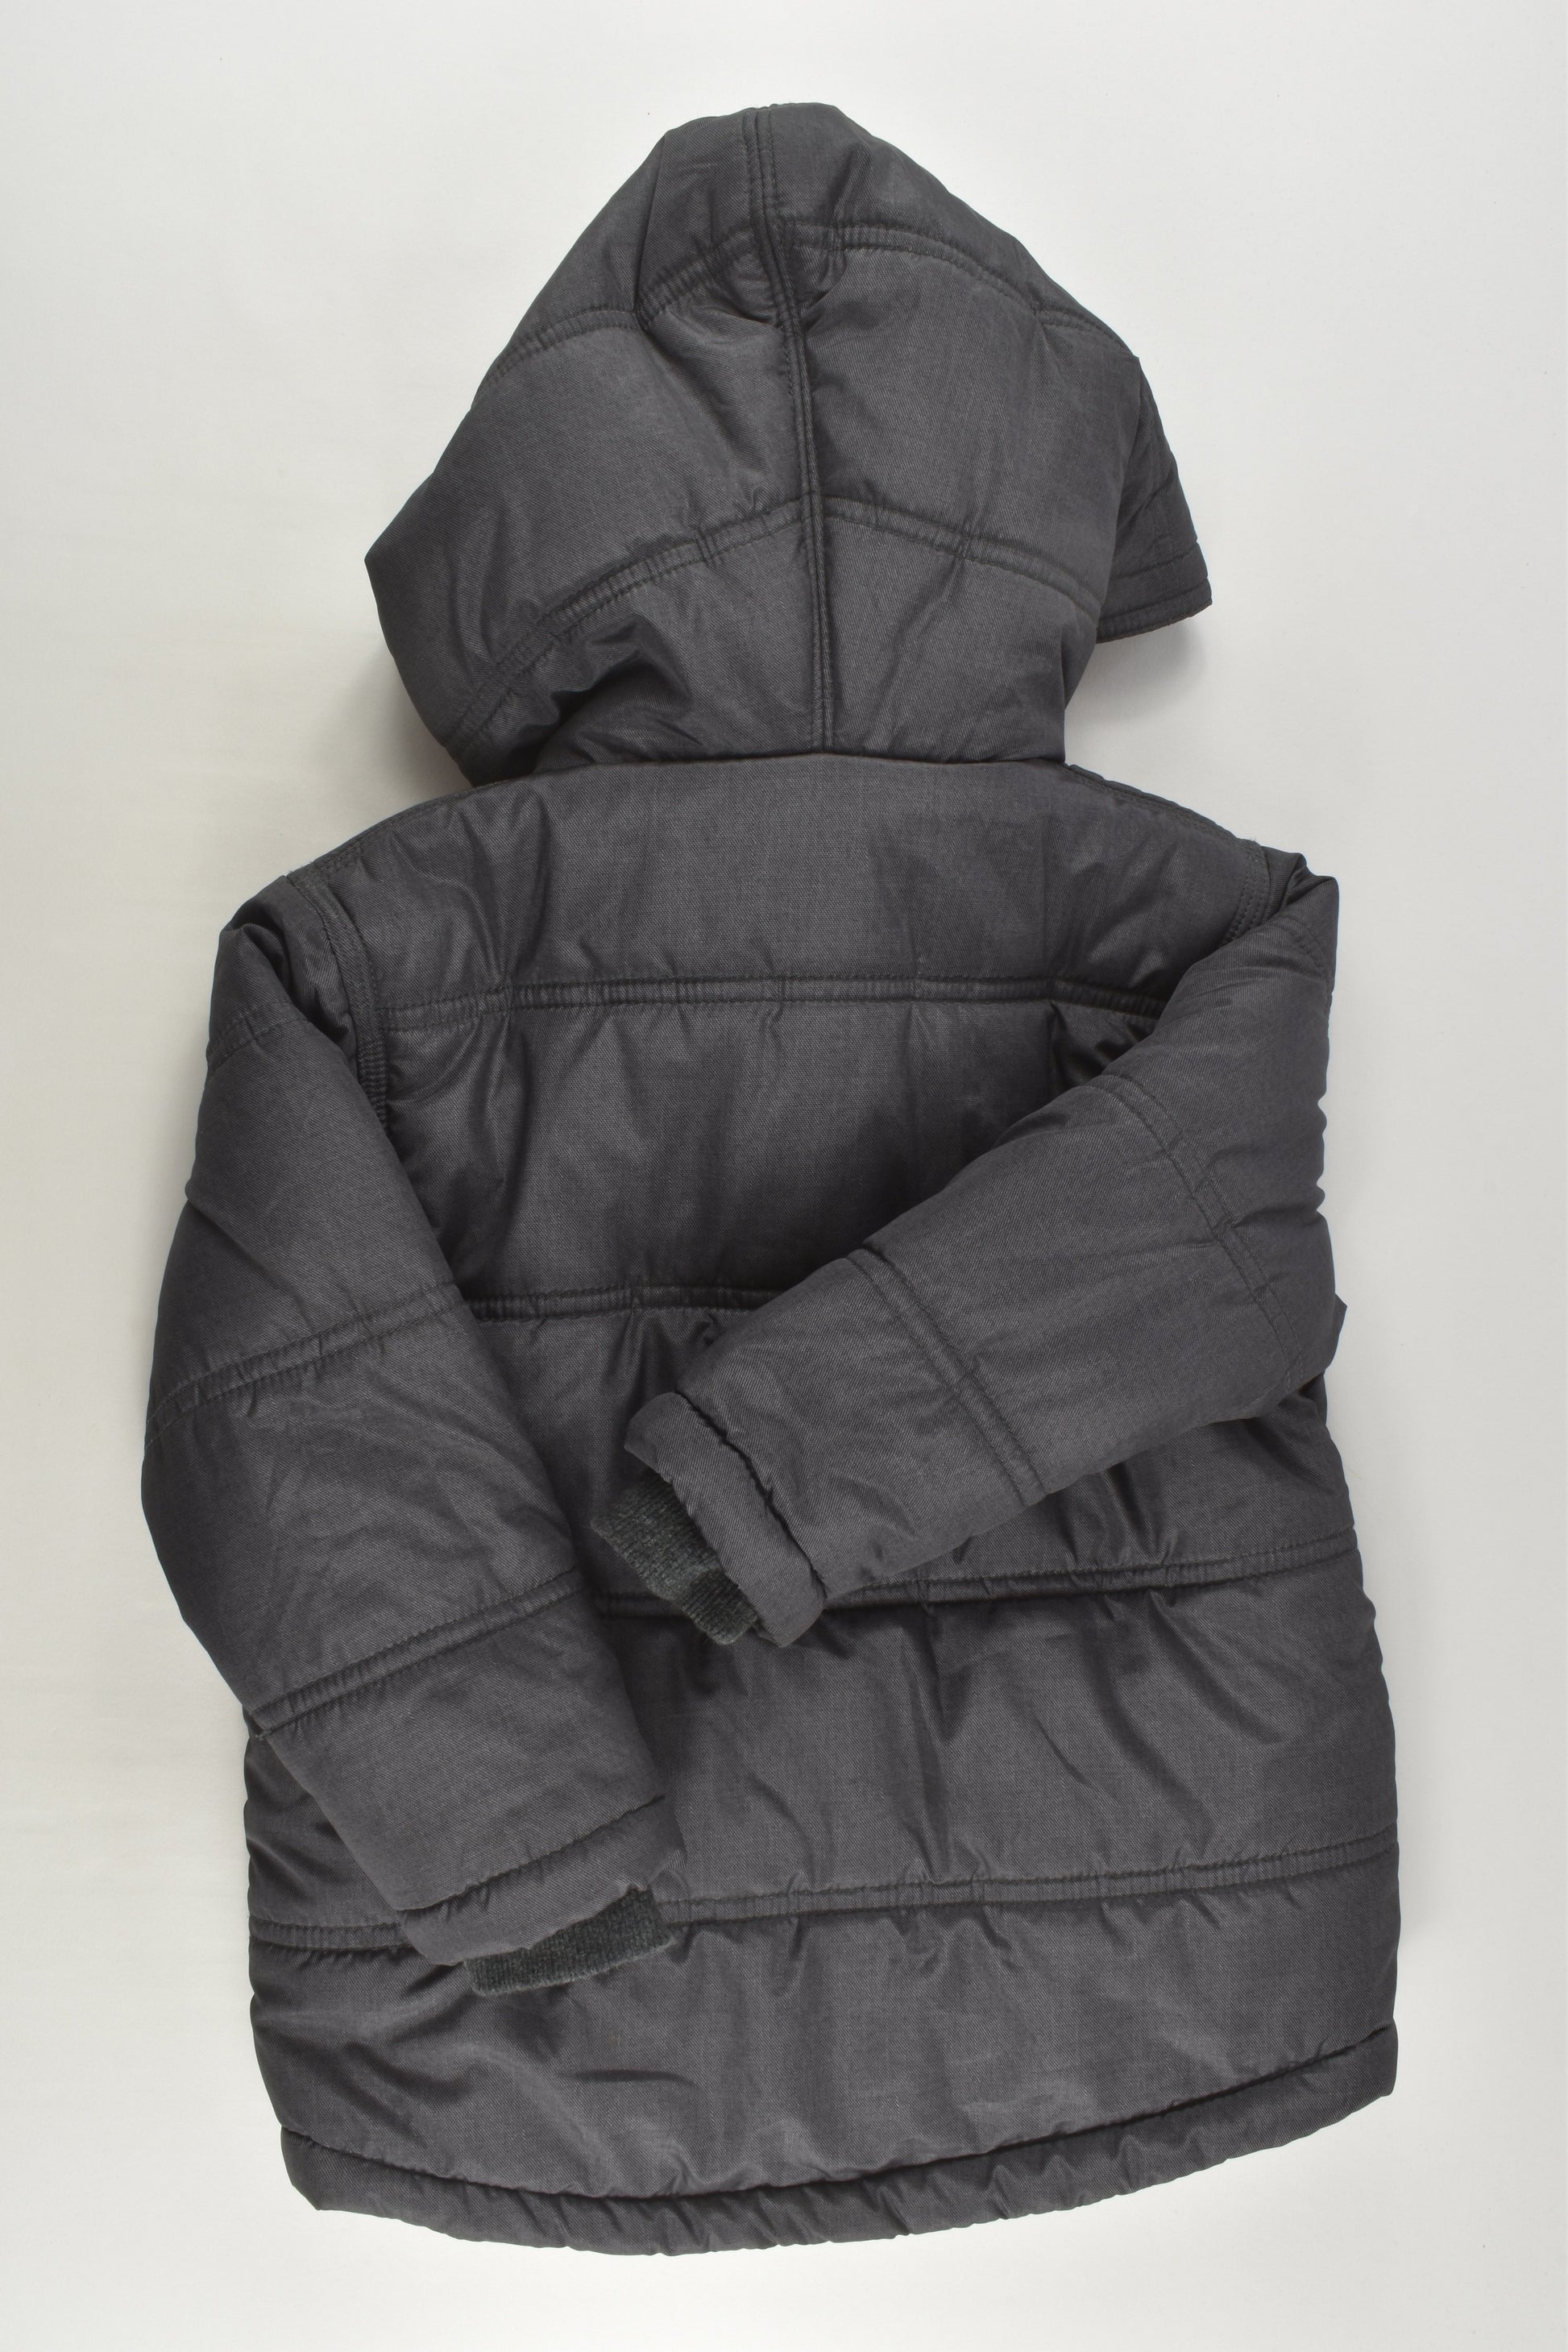 Target Size 3 Hooded Puffer Jacket